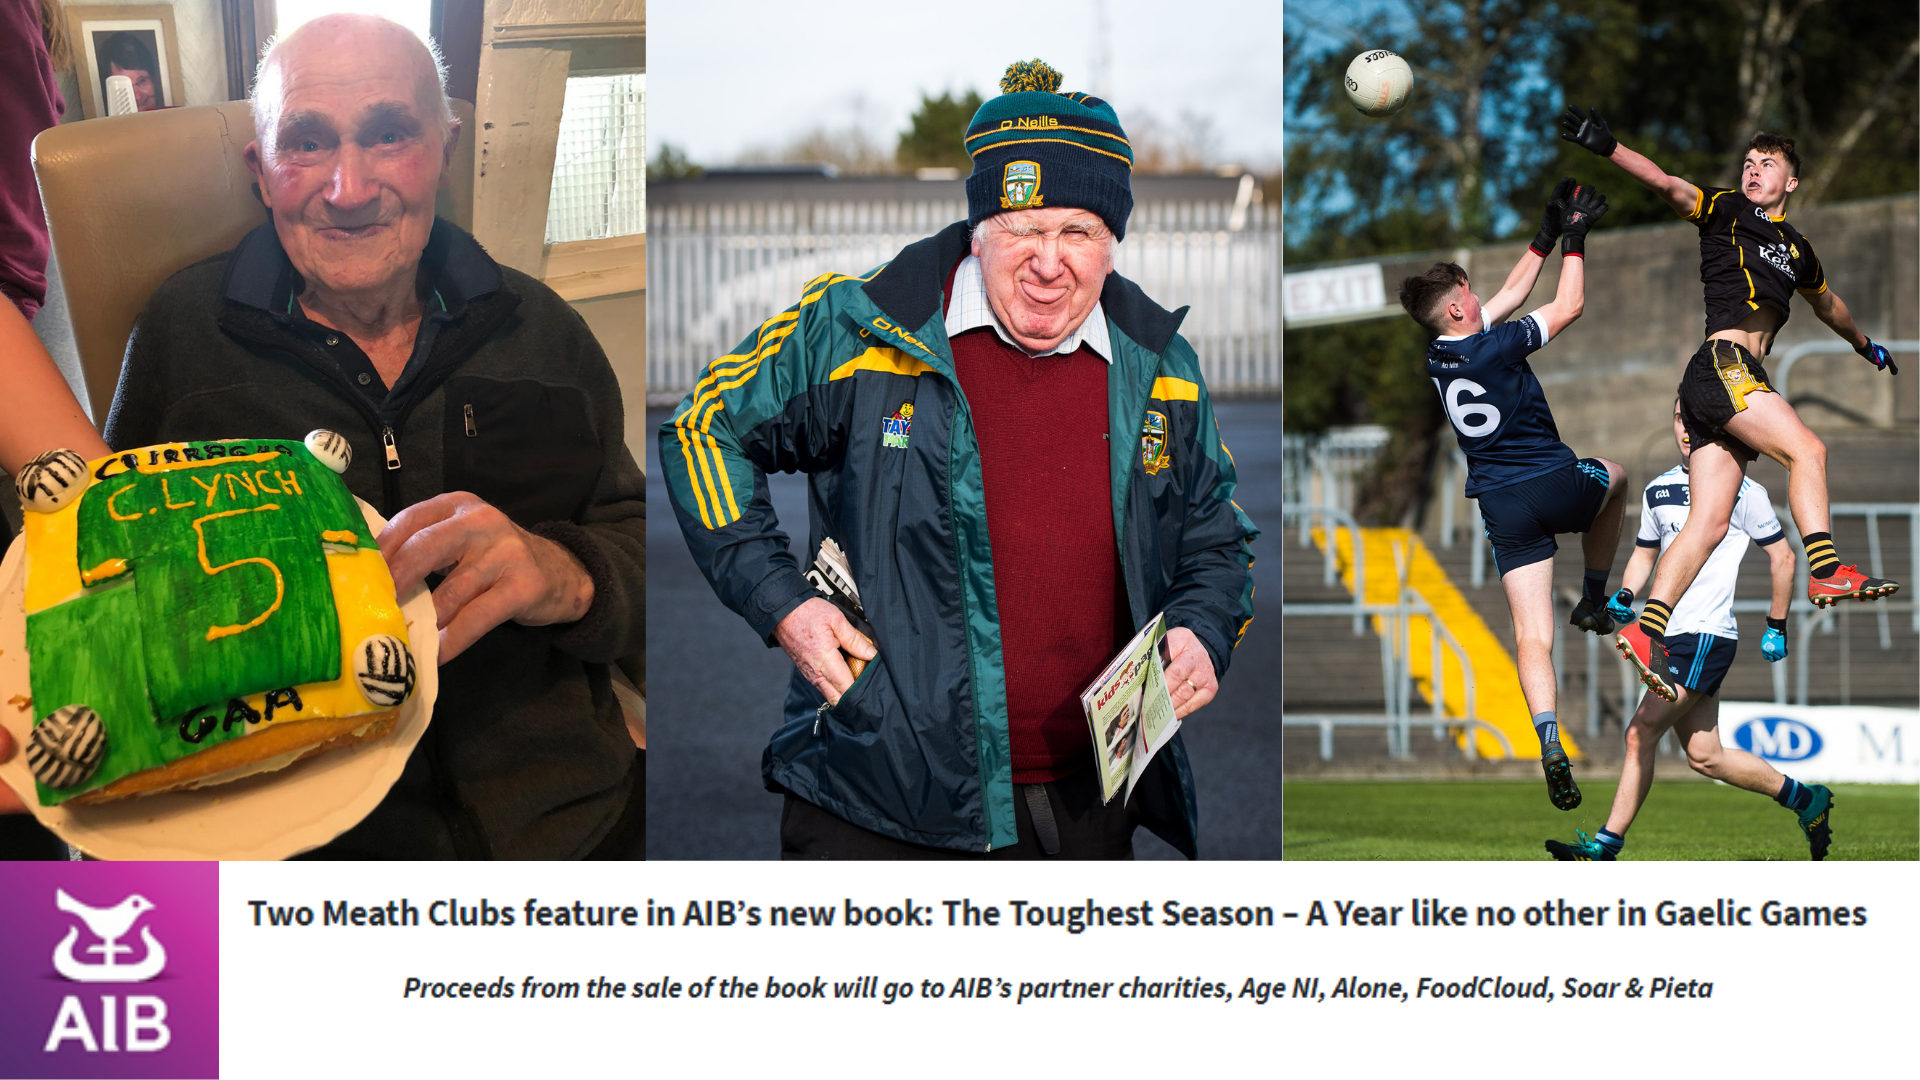 Two Meath Clubs feature in AIB’s new book